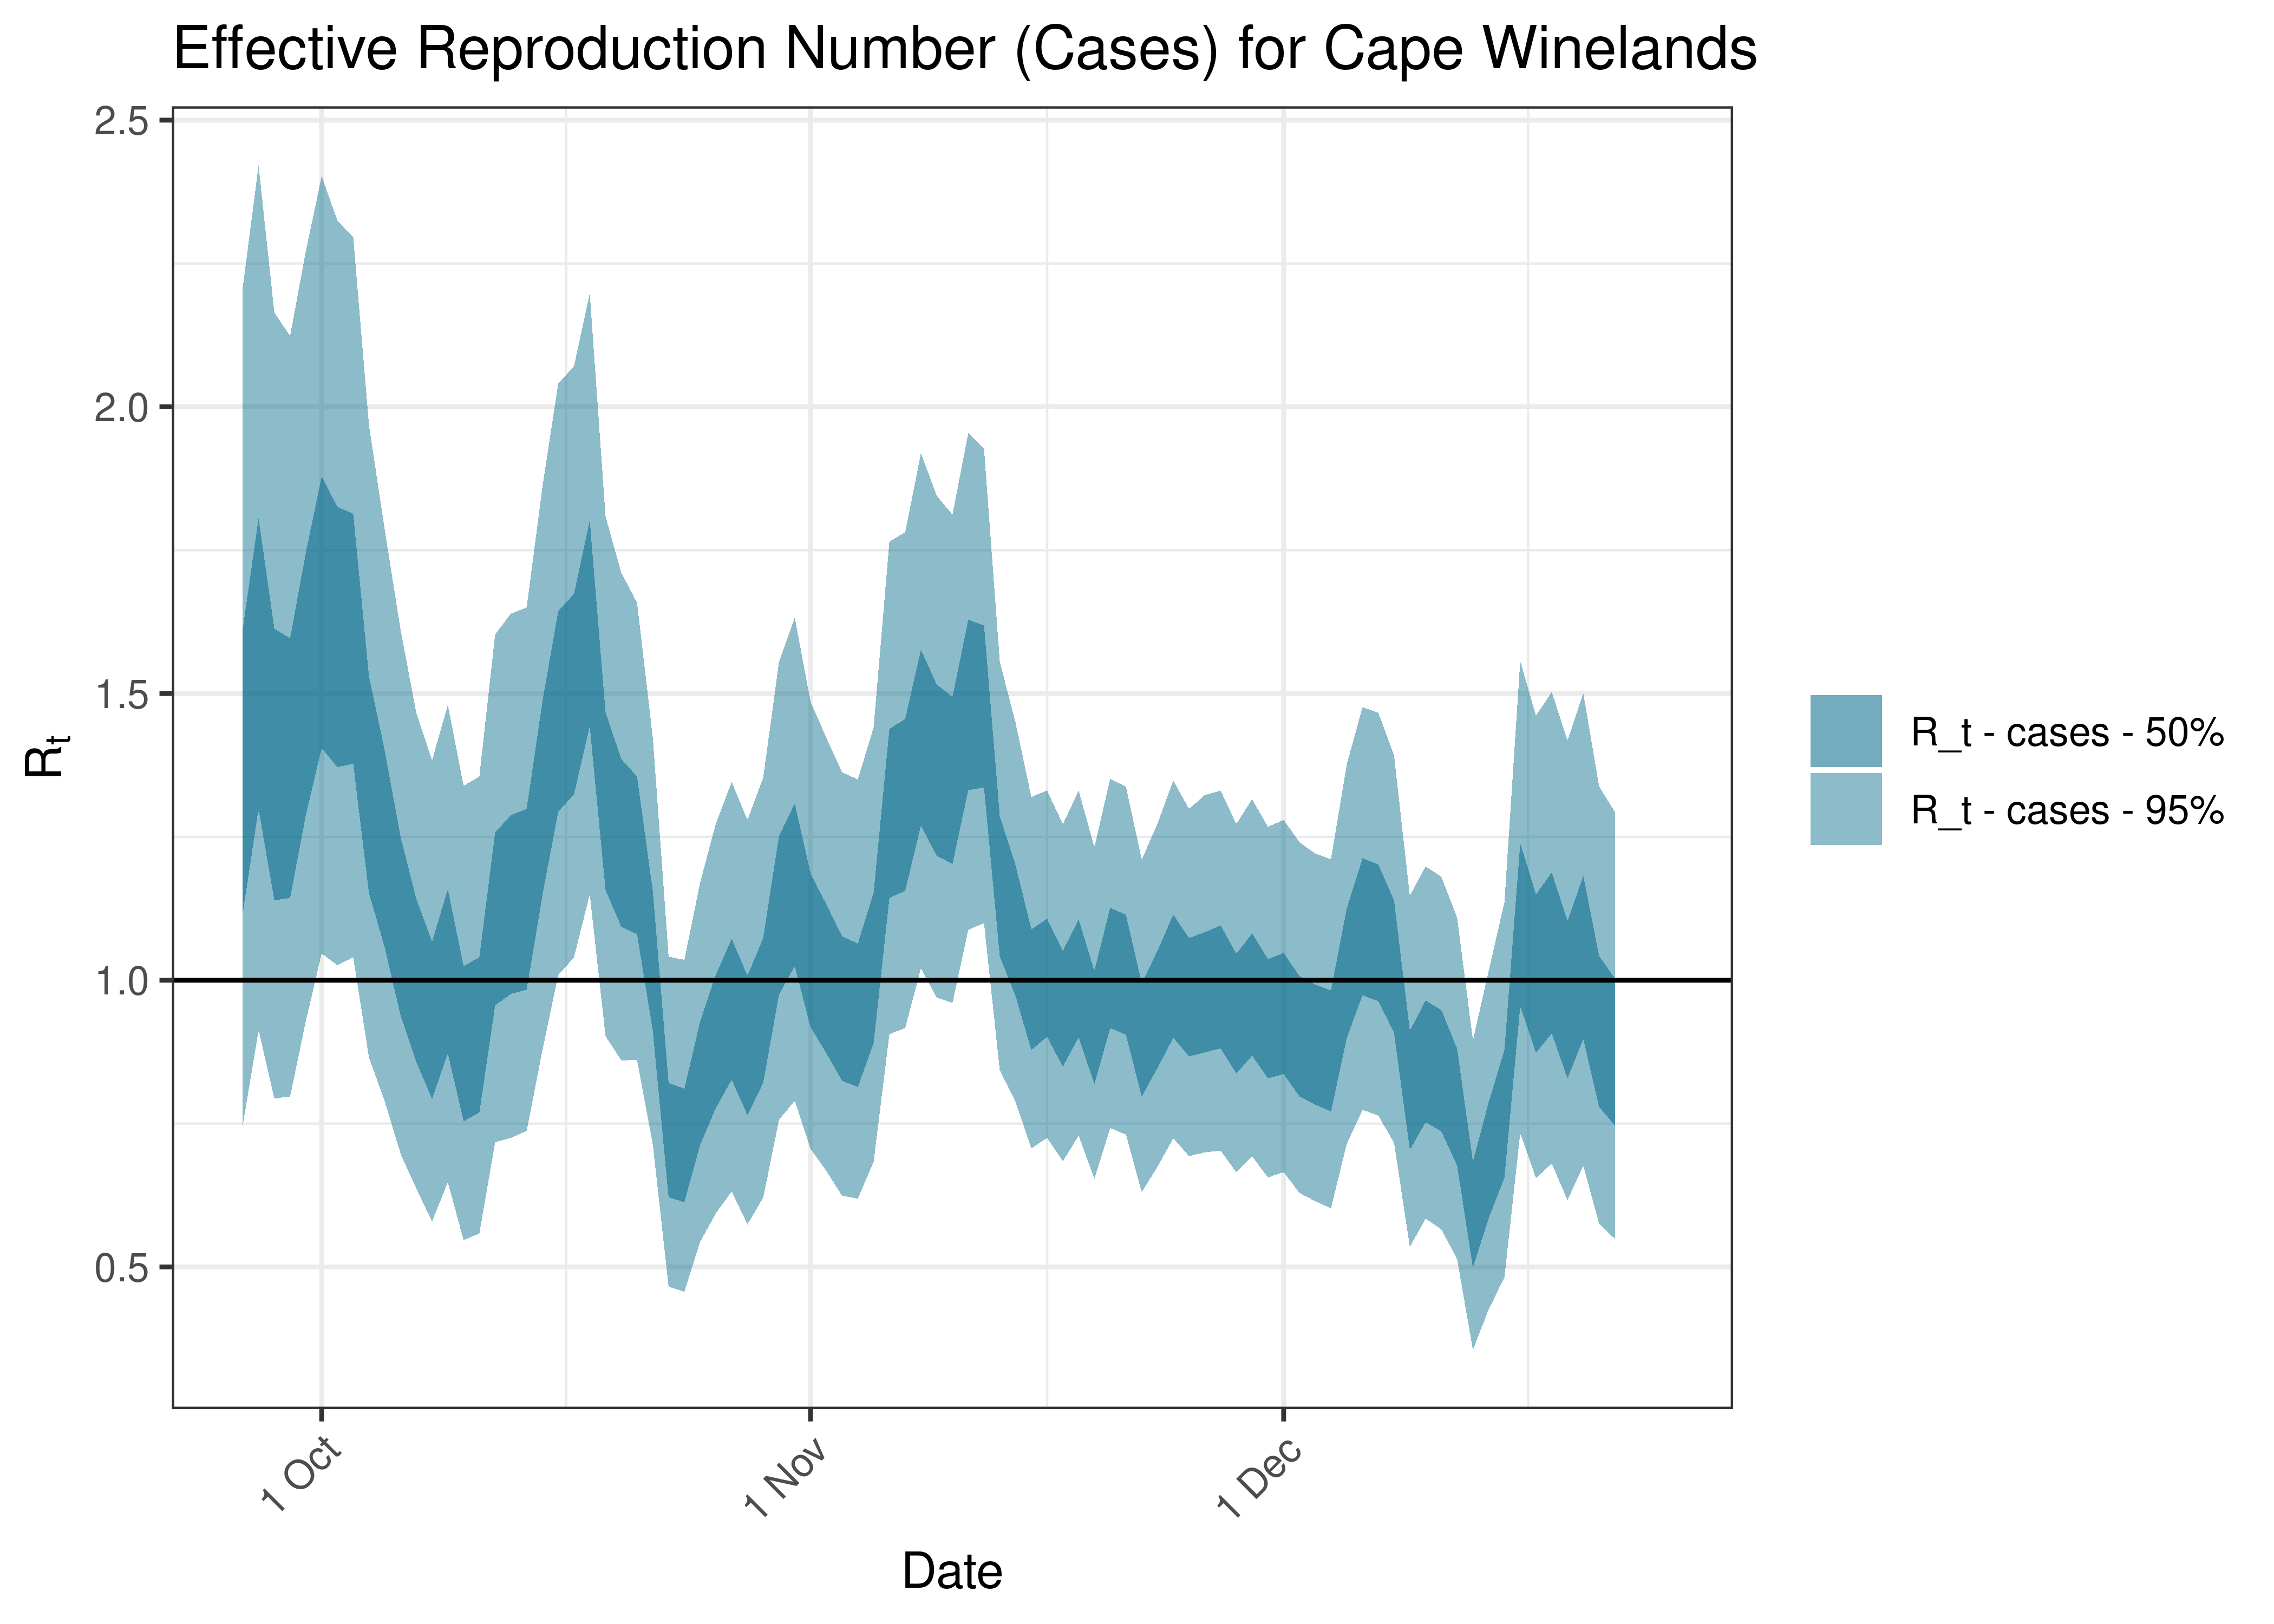 Estimated Effective Reproduction Number Based on Cases for Cape Winelands over last 90 days